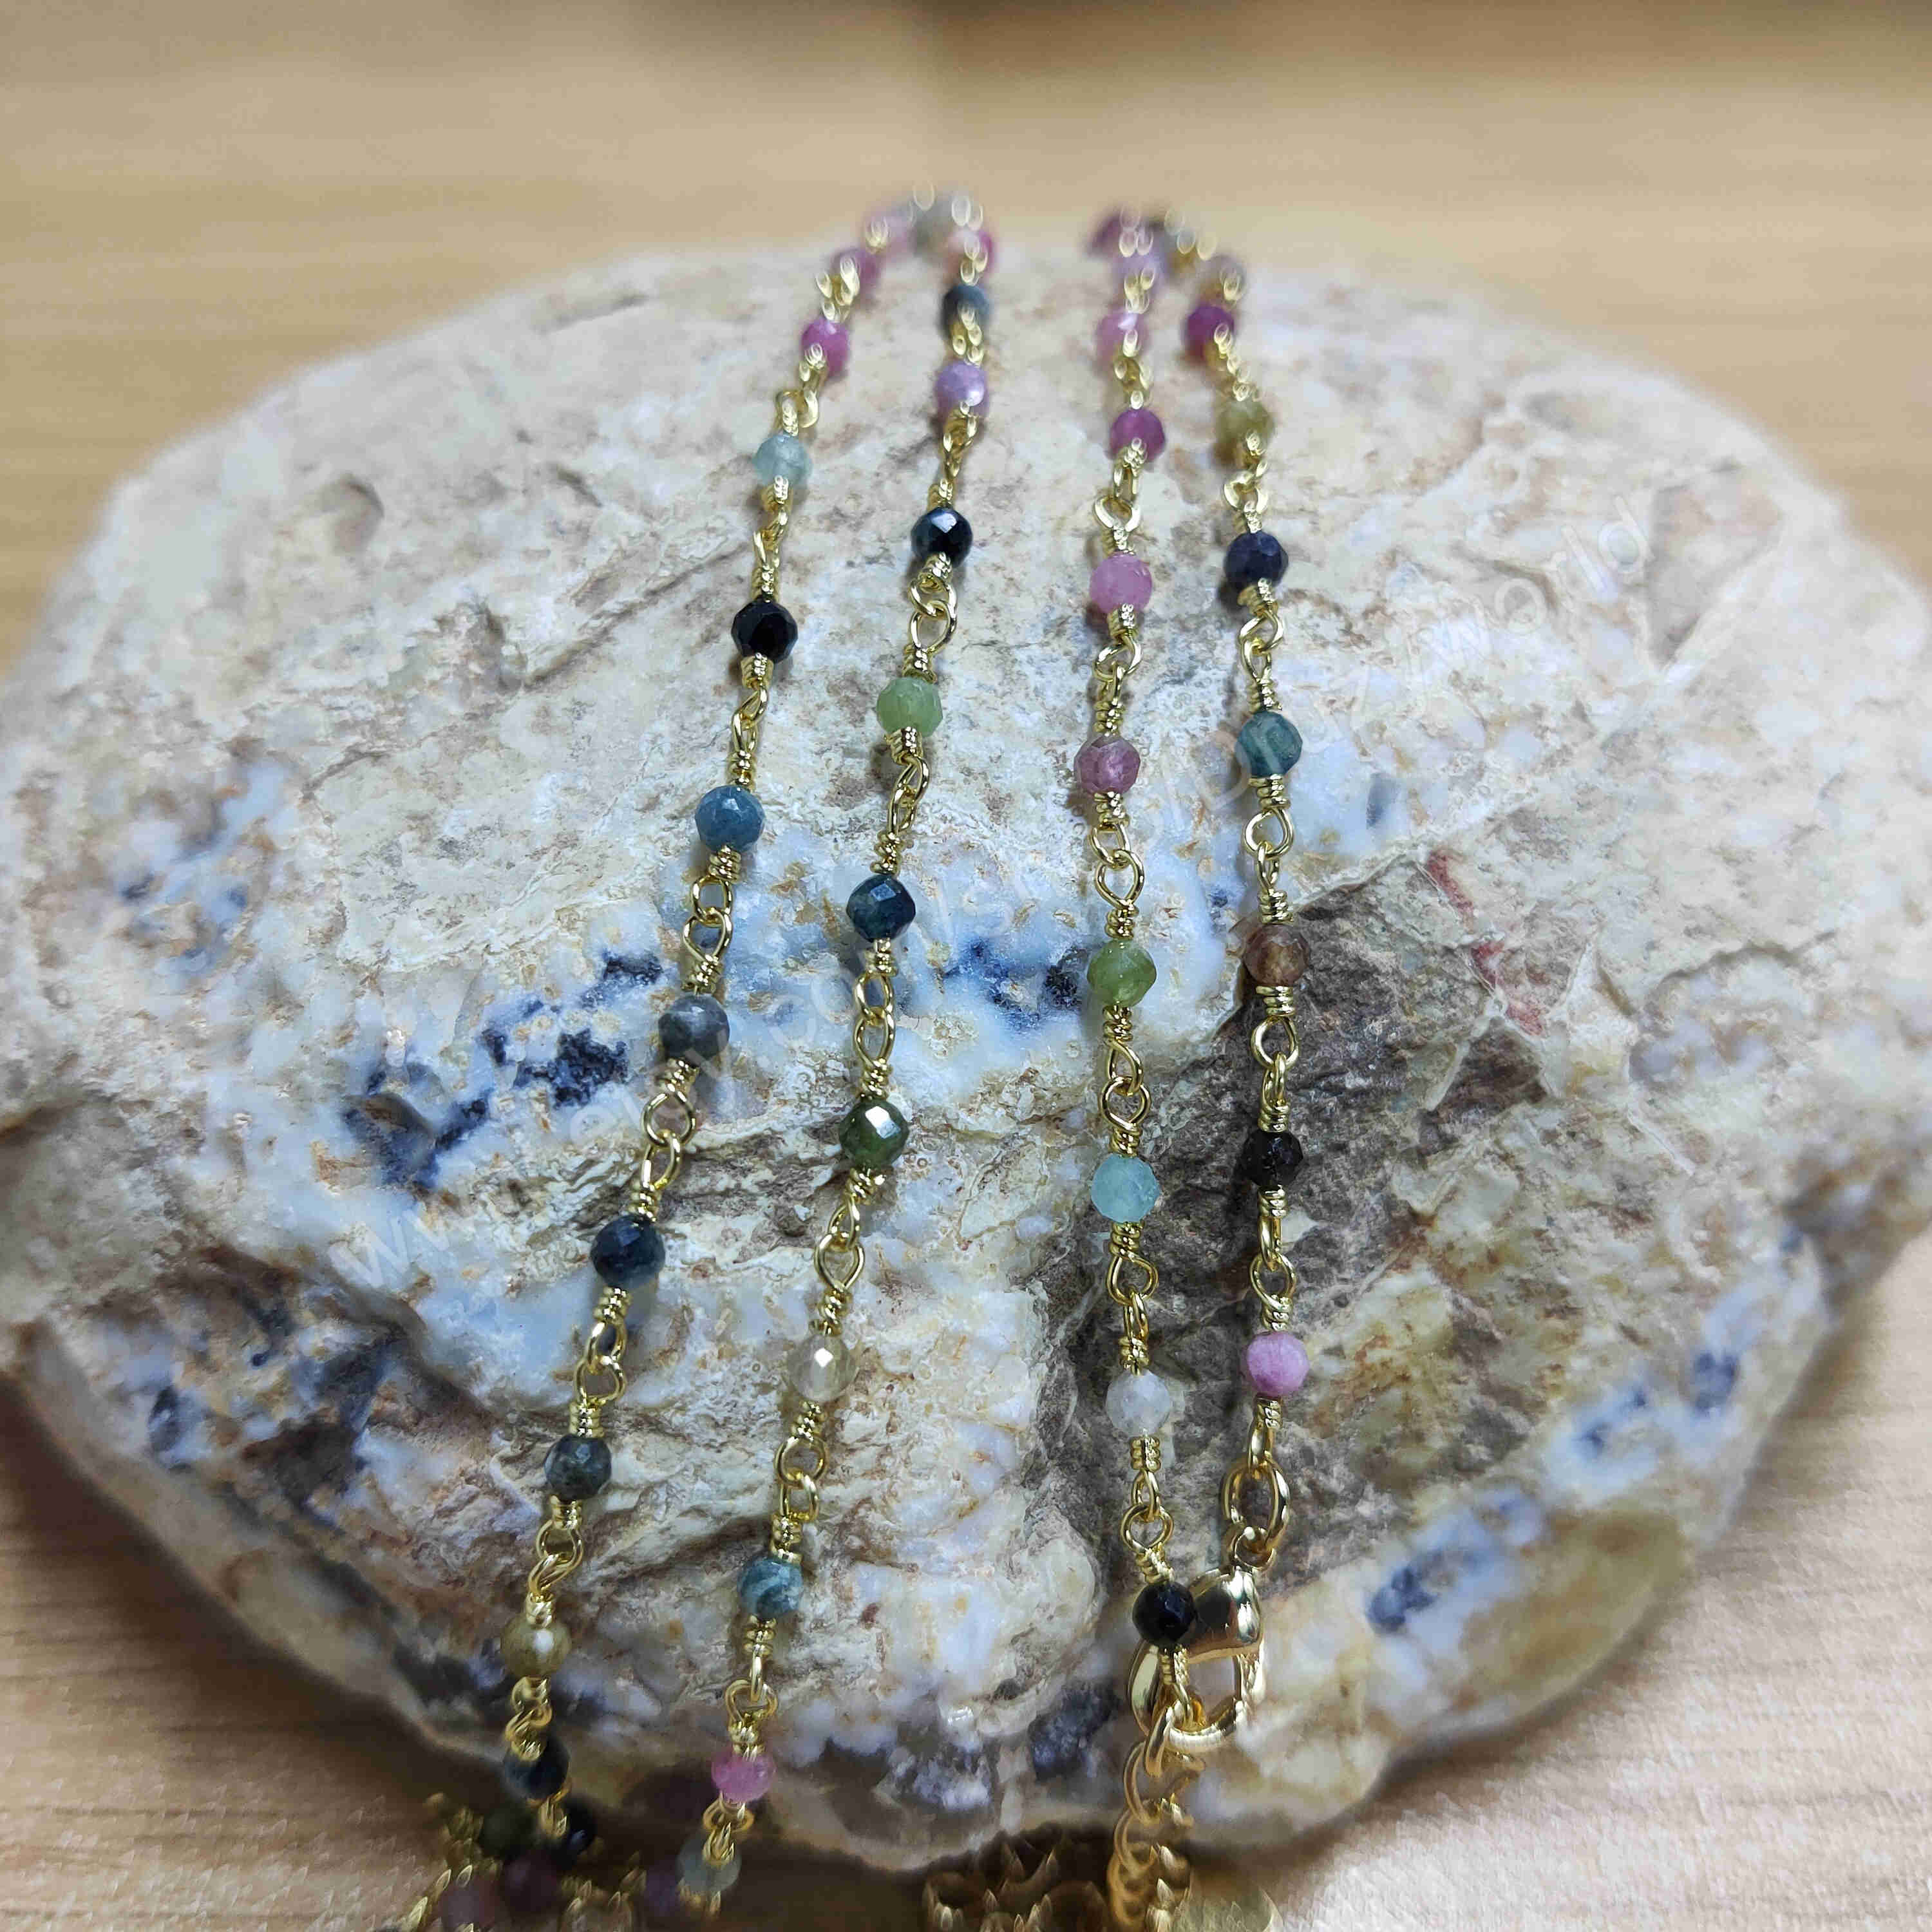 Gold Plated Brass Natural Gemstone Bead Chain Necklace 3mm Faceted Beads Amethyst Labradorite Fluorite Crystal Stone Rosary Chain Bottle Necklaces For Jewelry Making JT245-N